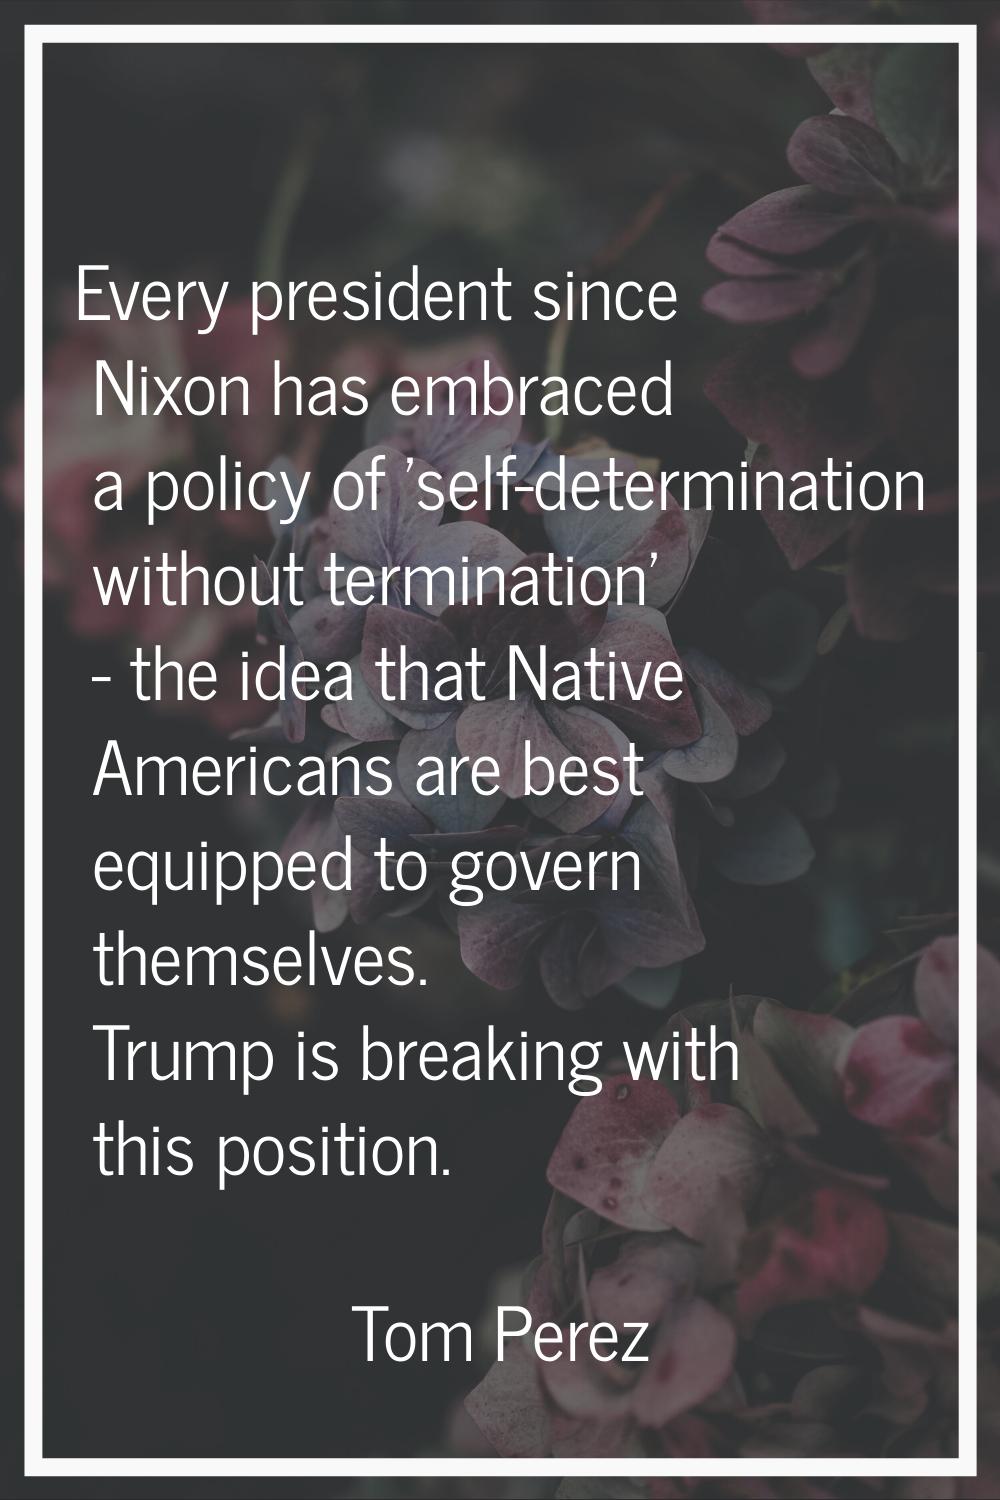 Every president since Nixon has embraced a policy of 'self-determination without termination' - the